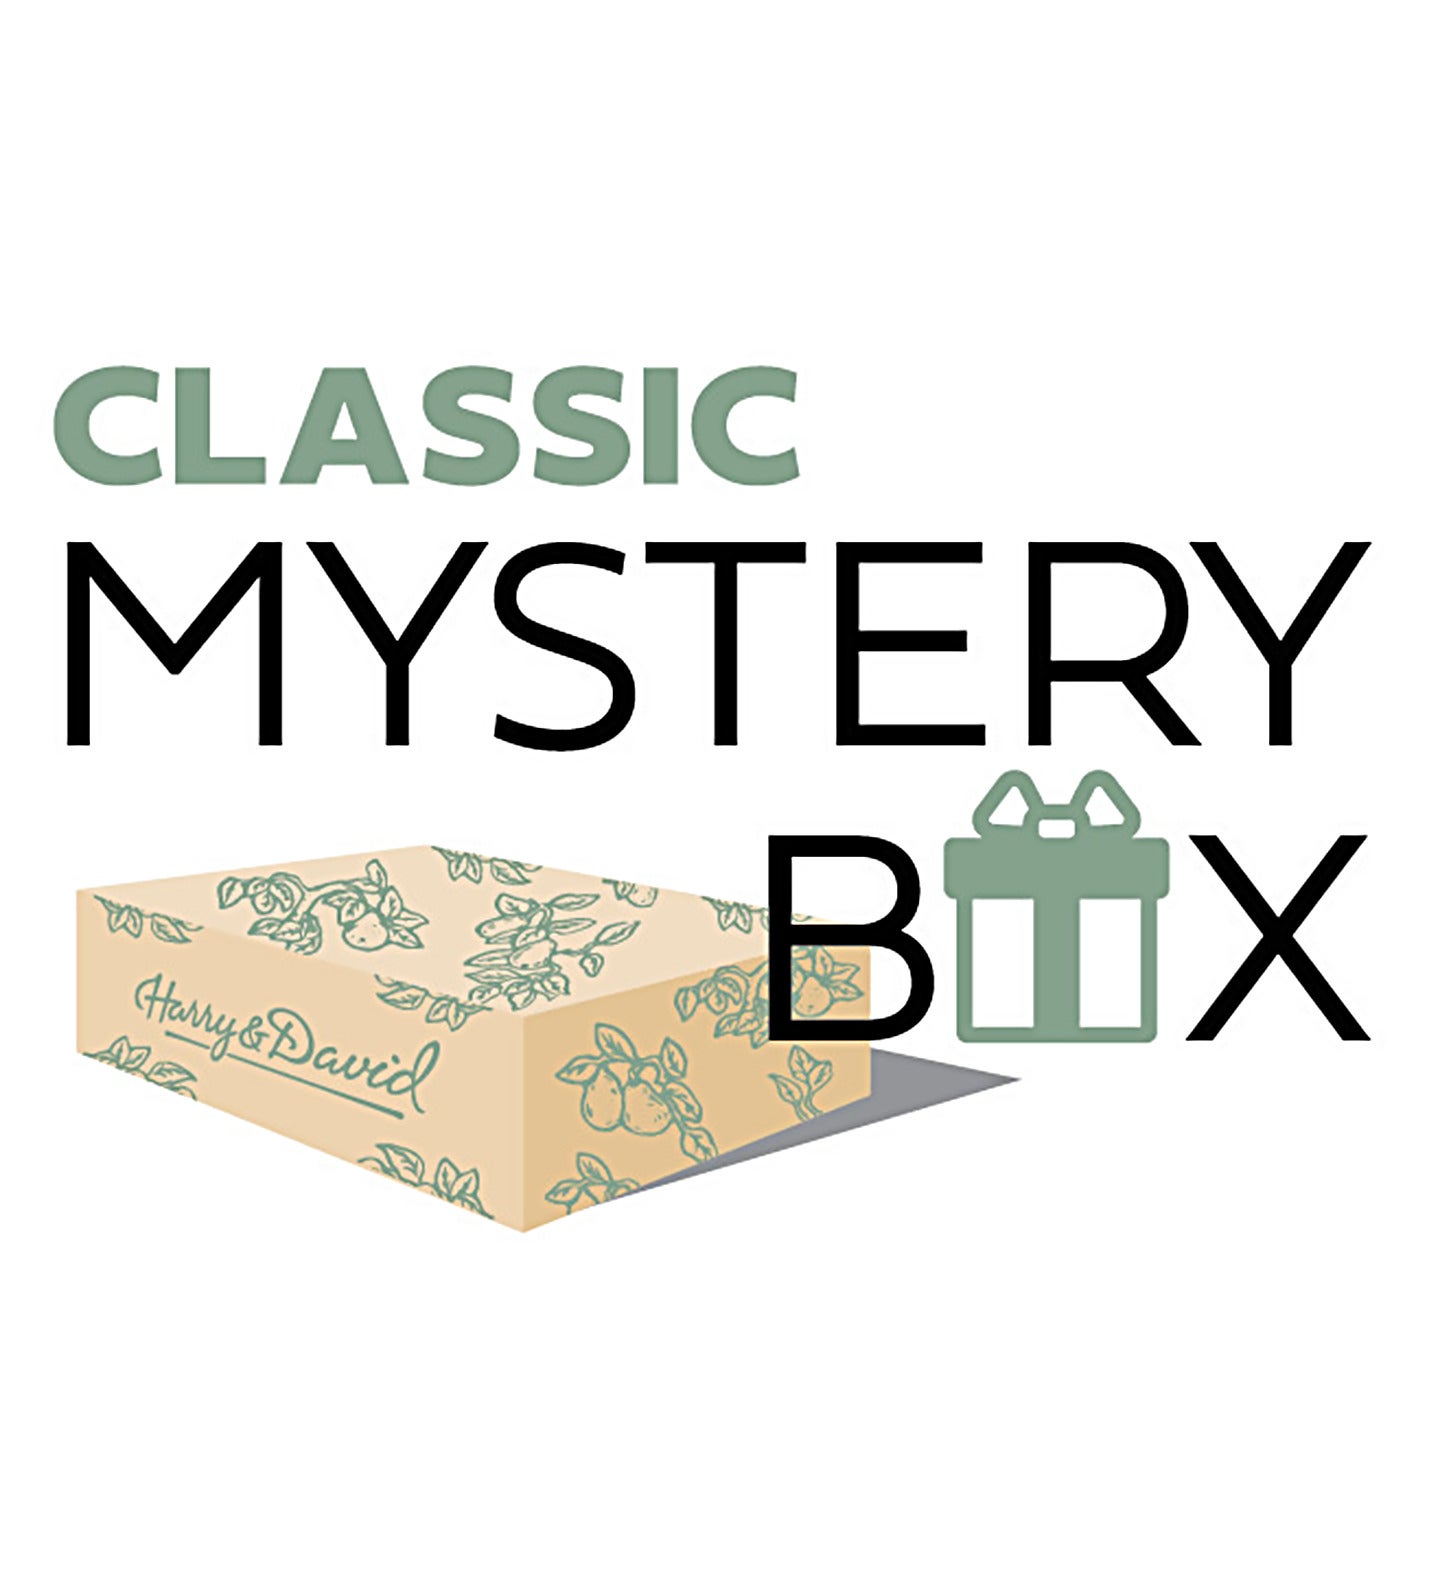  LankyBox Giant Mystery Box: Wearable Boxy case, 2 Figures, one  6” Glow-in-The-Dark Plush, a Squishy , pop-it Fidget Toy, Canny with  pop-Out Sticky, and 3 Stickers : Toys & Games